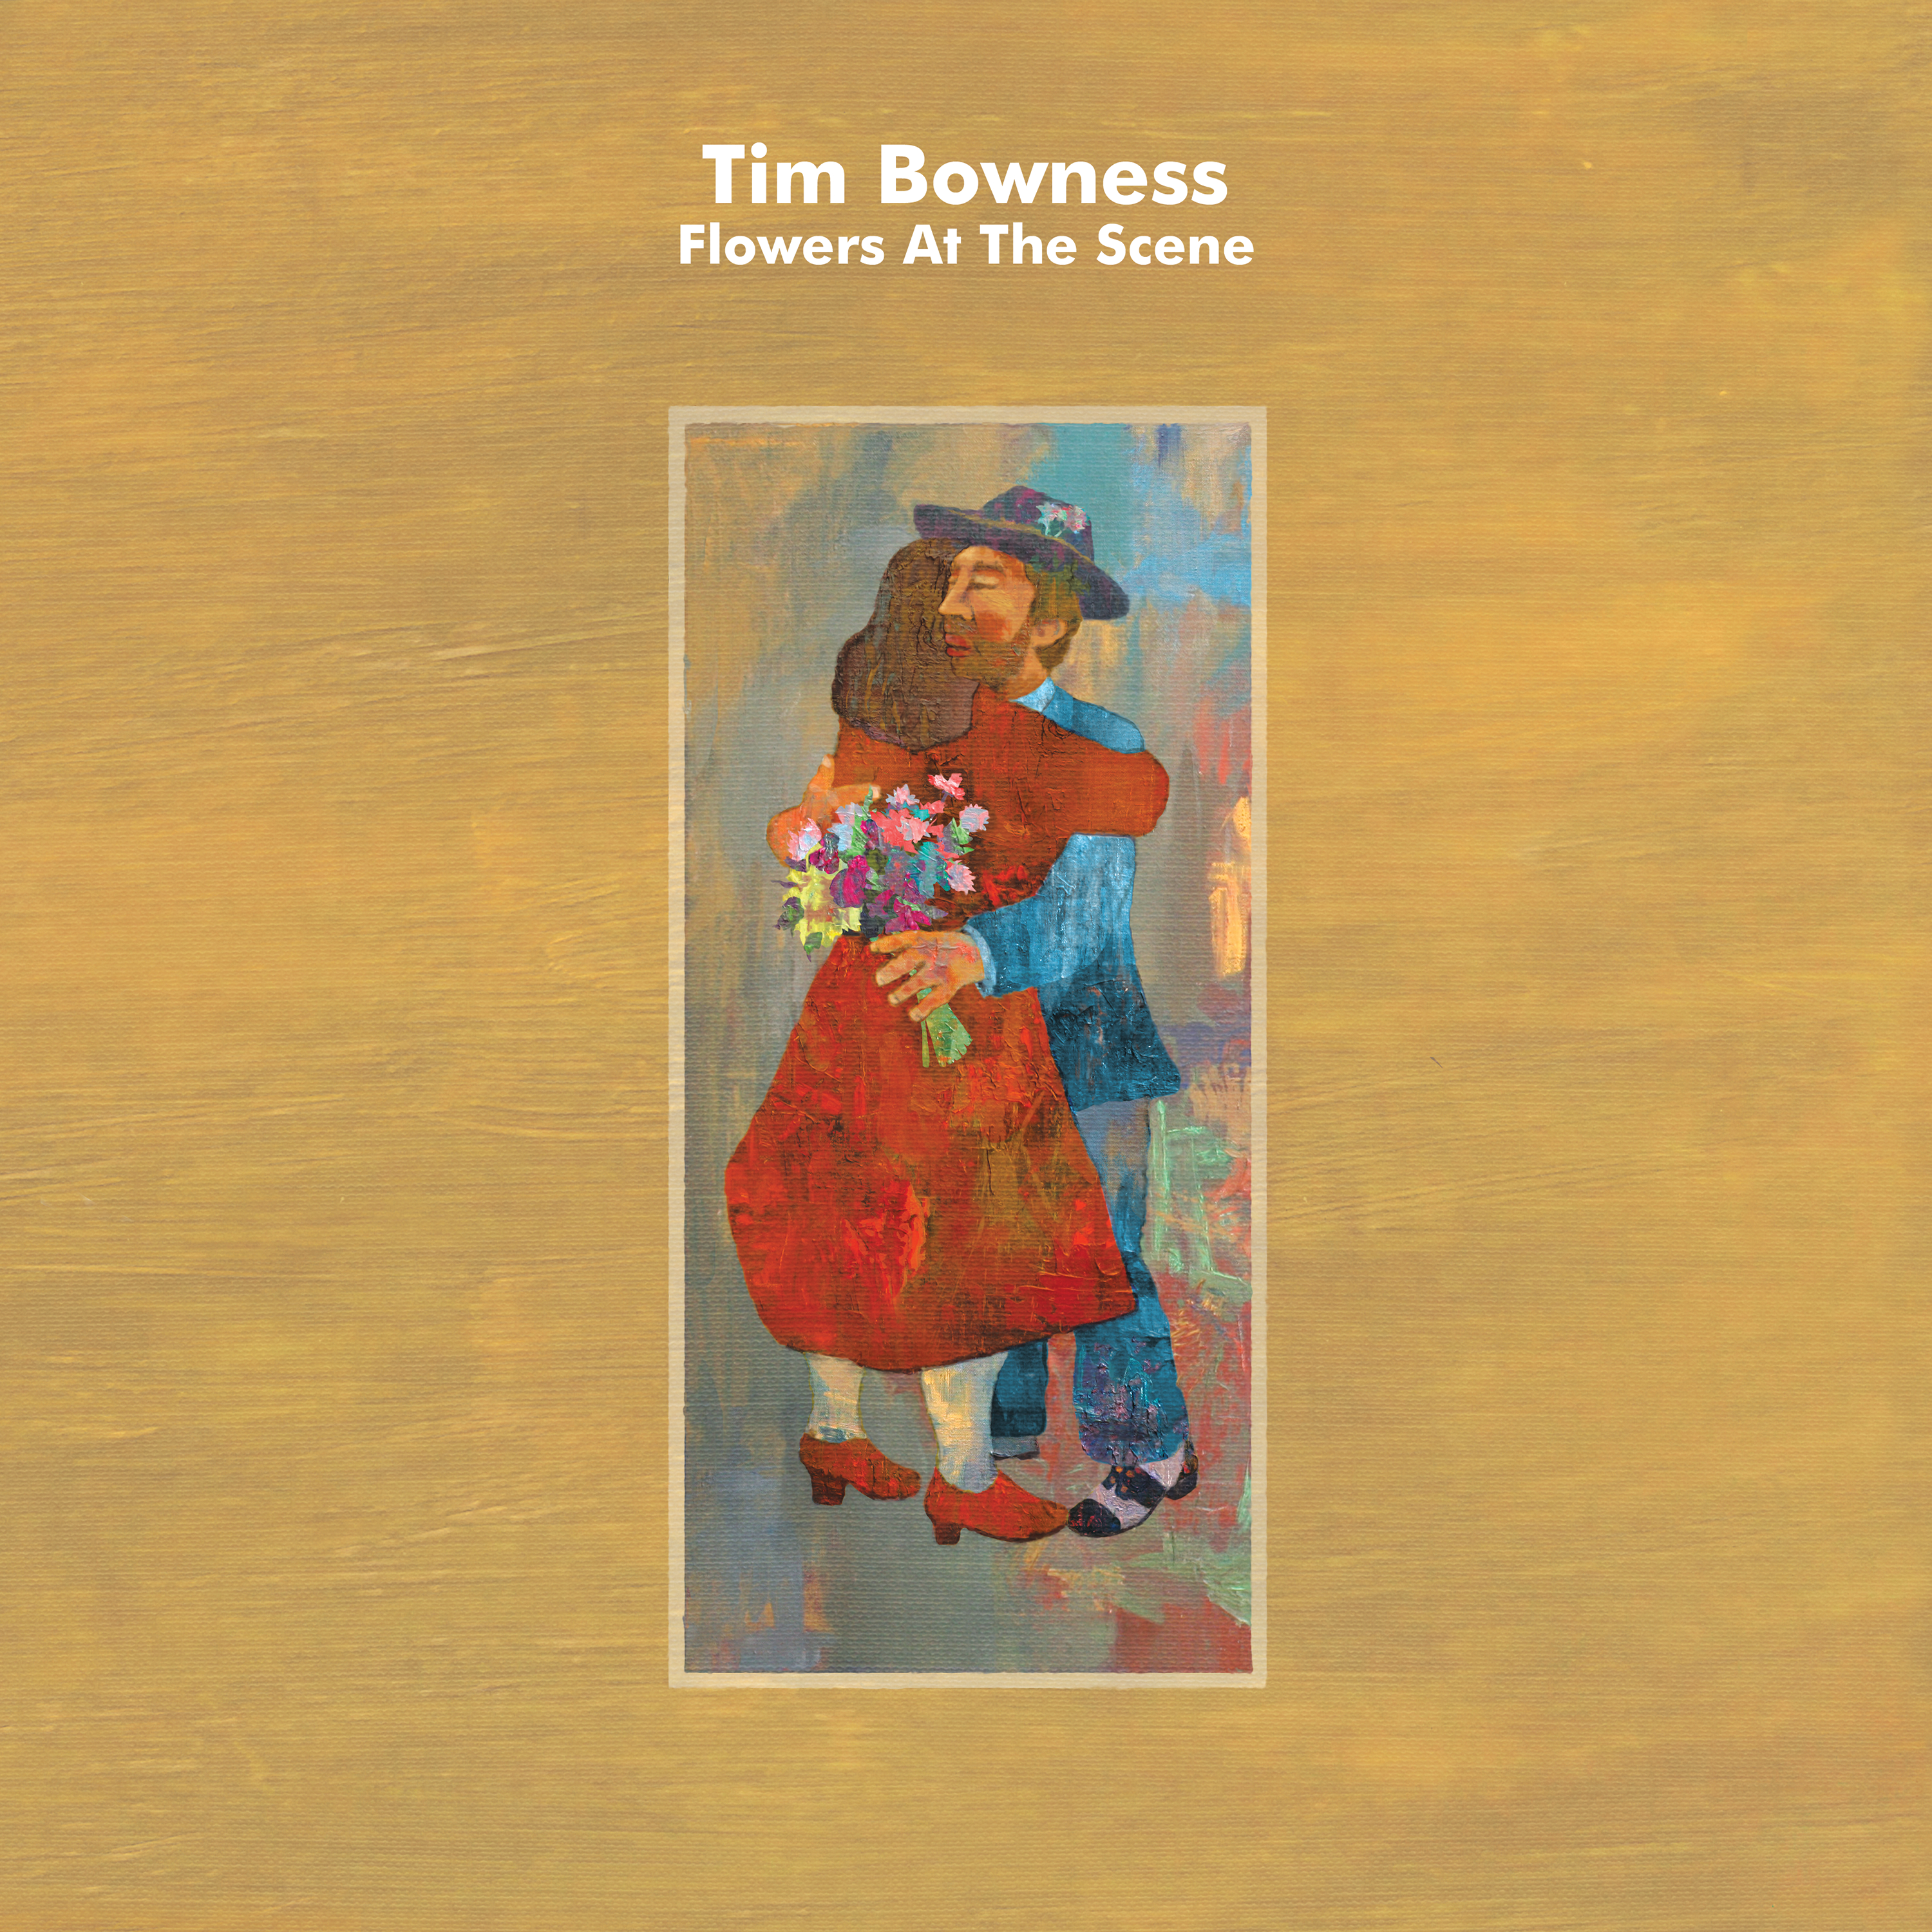 Tim here. Tim Bowness Flowers at the Scene. Tim Bowness - Flowers at the Scene (2019). Tim Bowness. Tim Bowness-abandoned Dancehall Dreams.